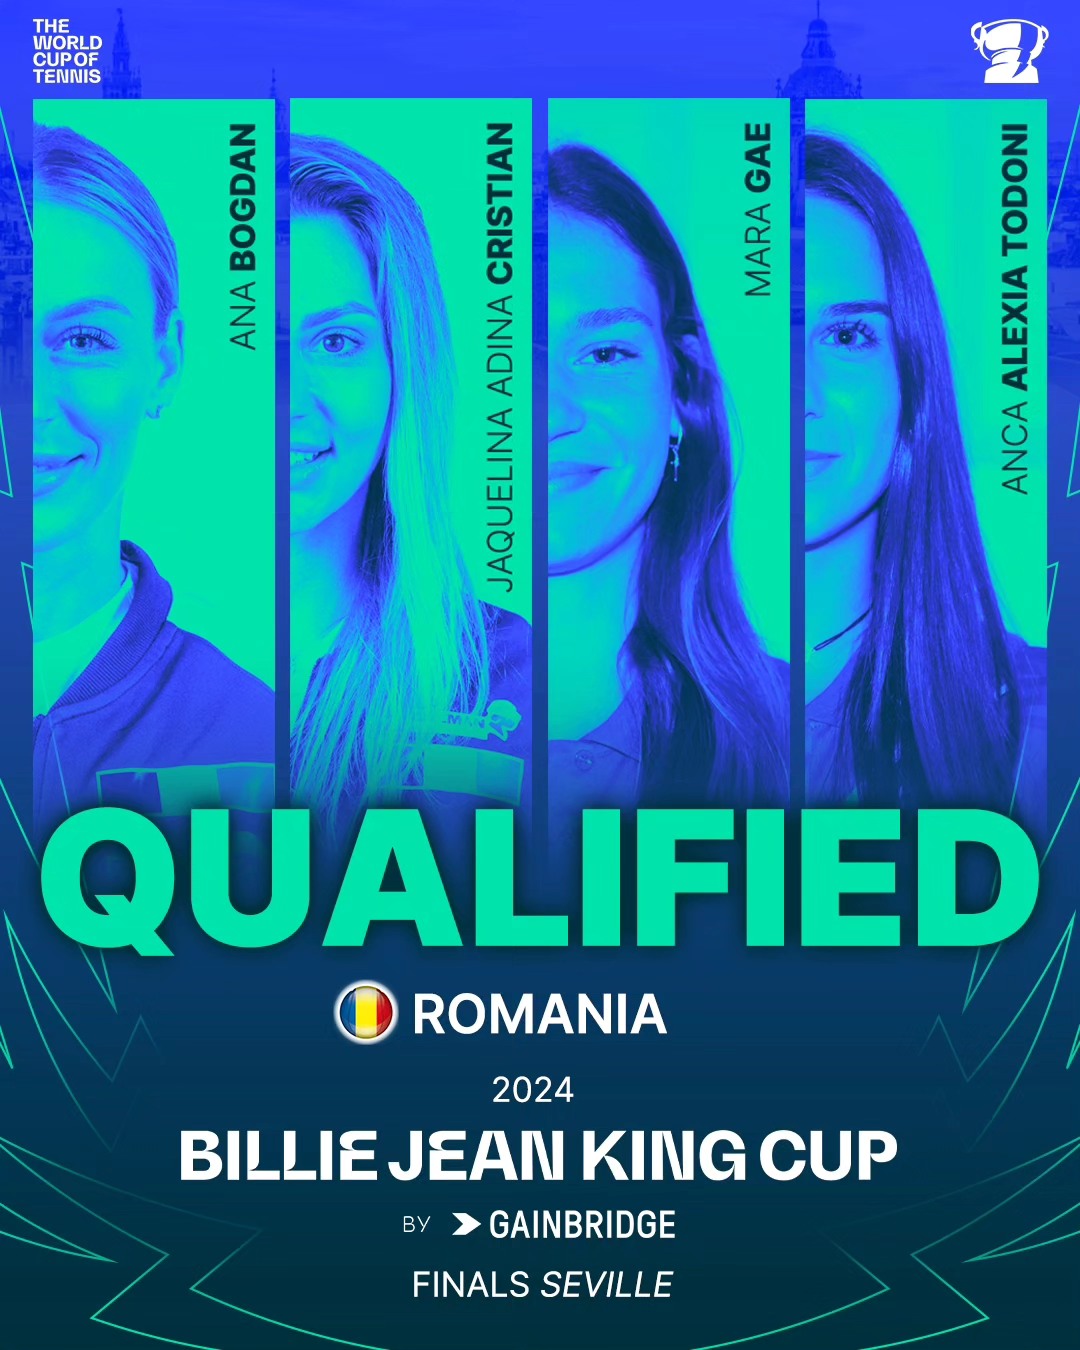 Romania bests Ukraine to qualify for final tournament of the Billie Jean King Cup